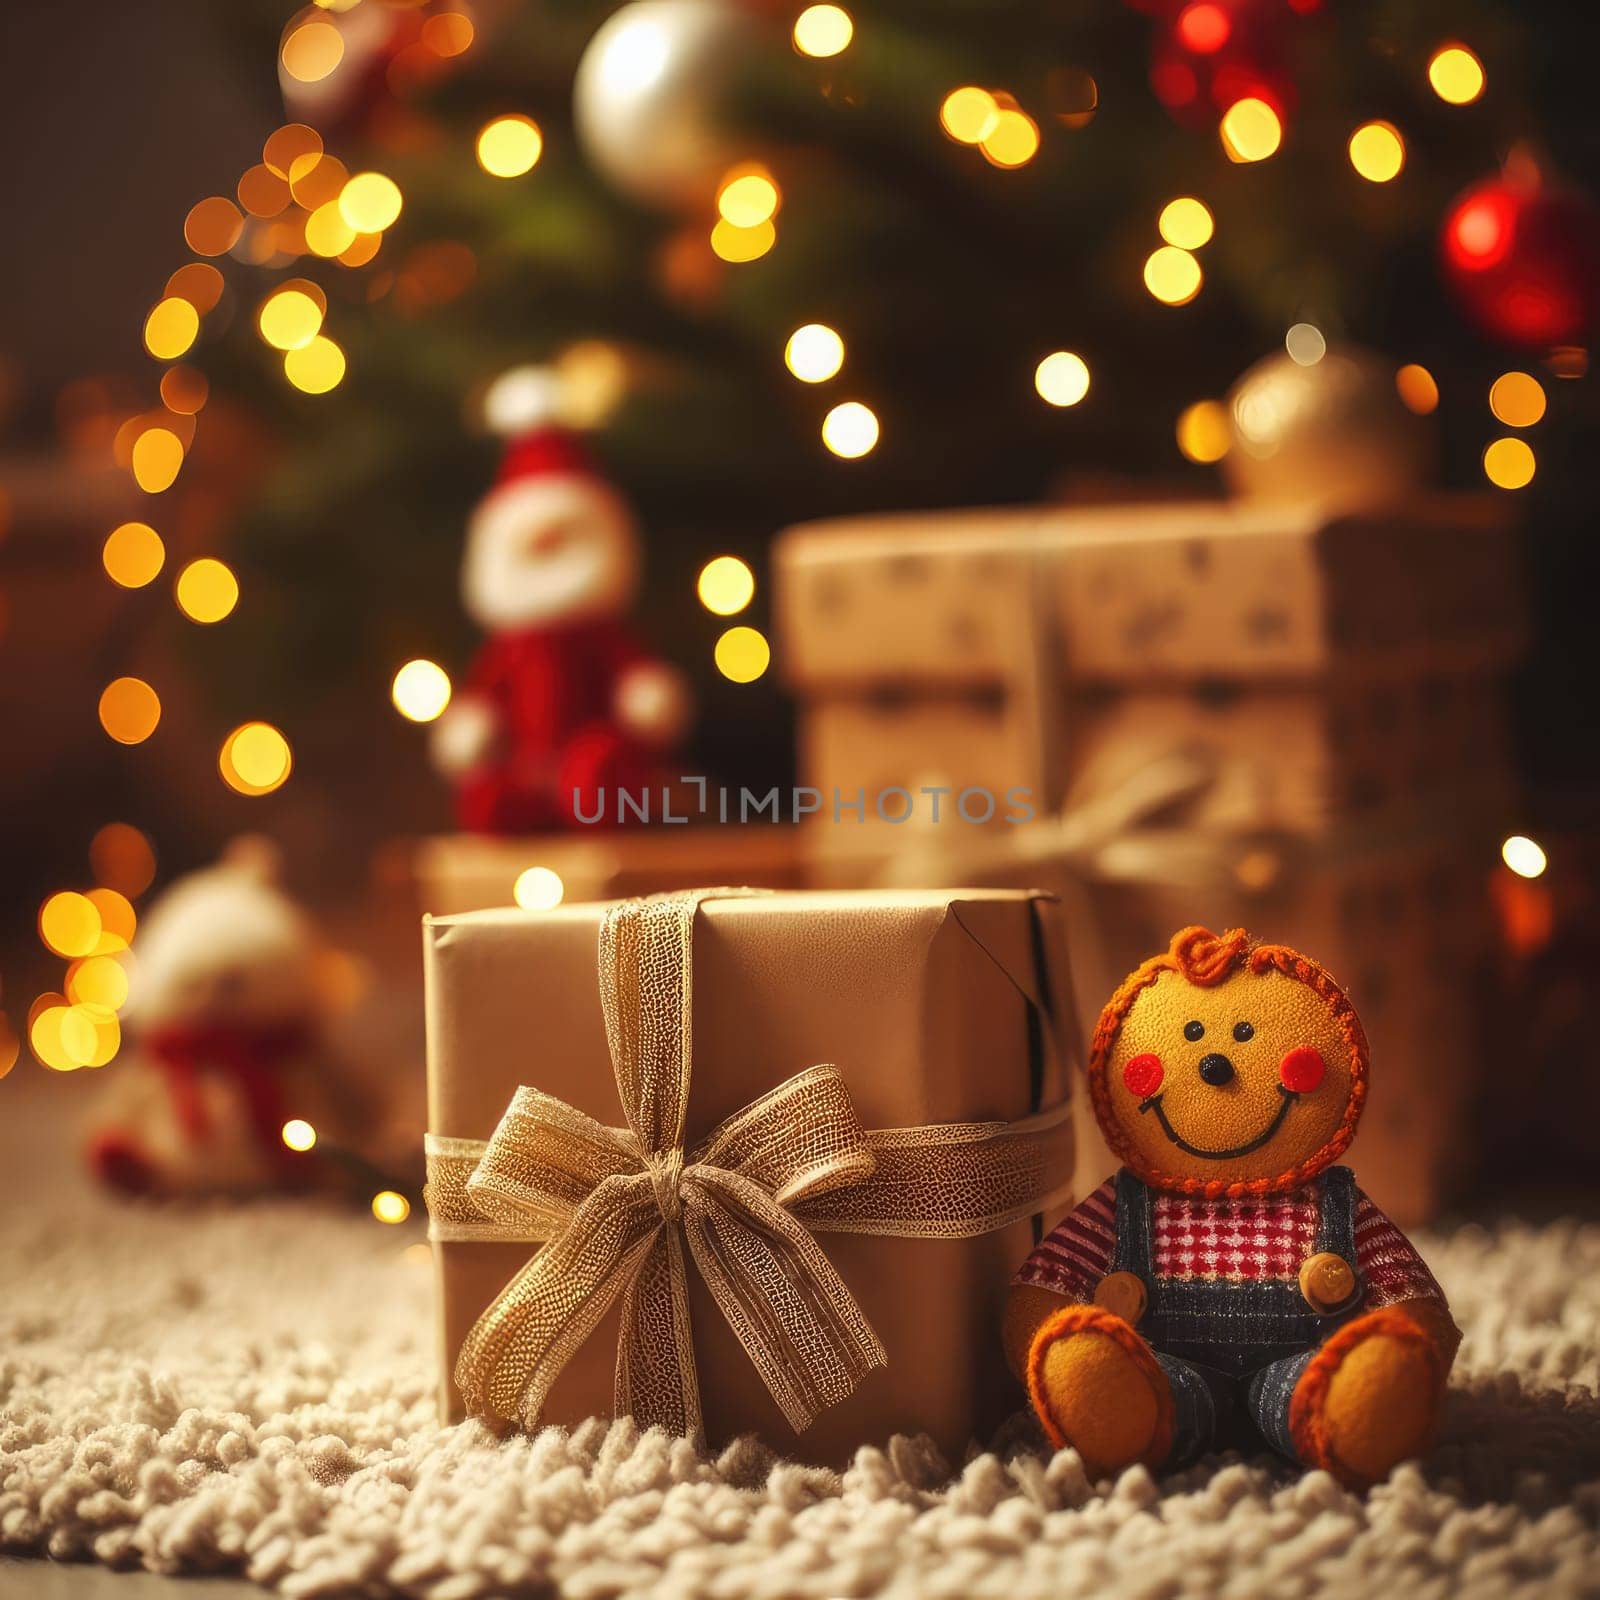 Luxury New Year gifts, different present boxes under Christmas tree in holiday eve, Christmastime celebration by Kobysh